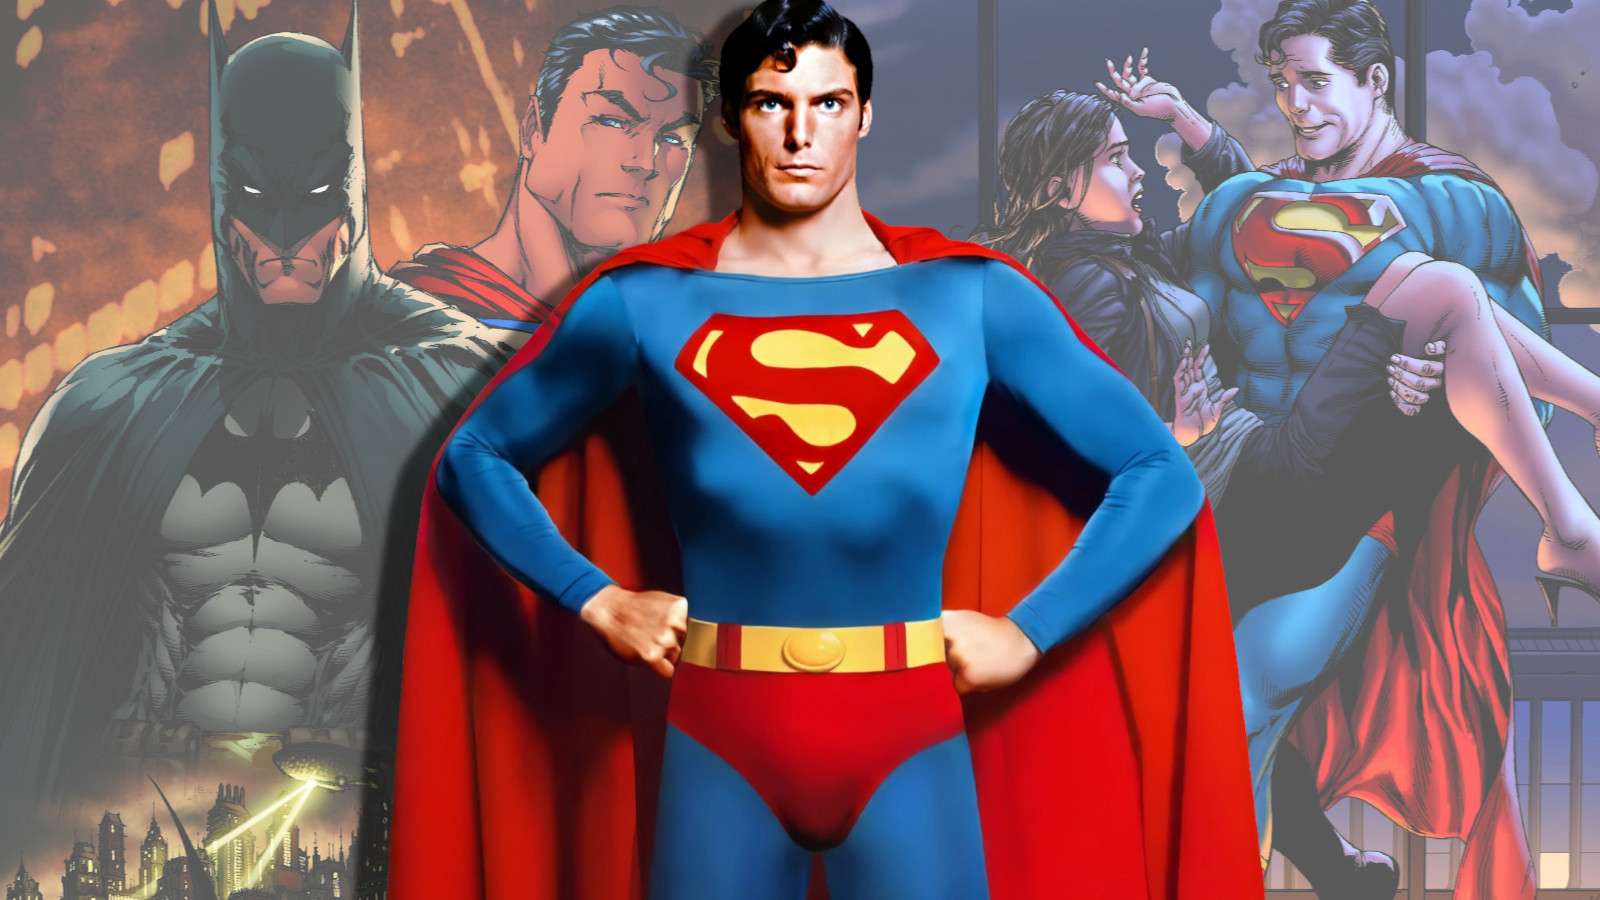 Superman in the comics and film